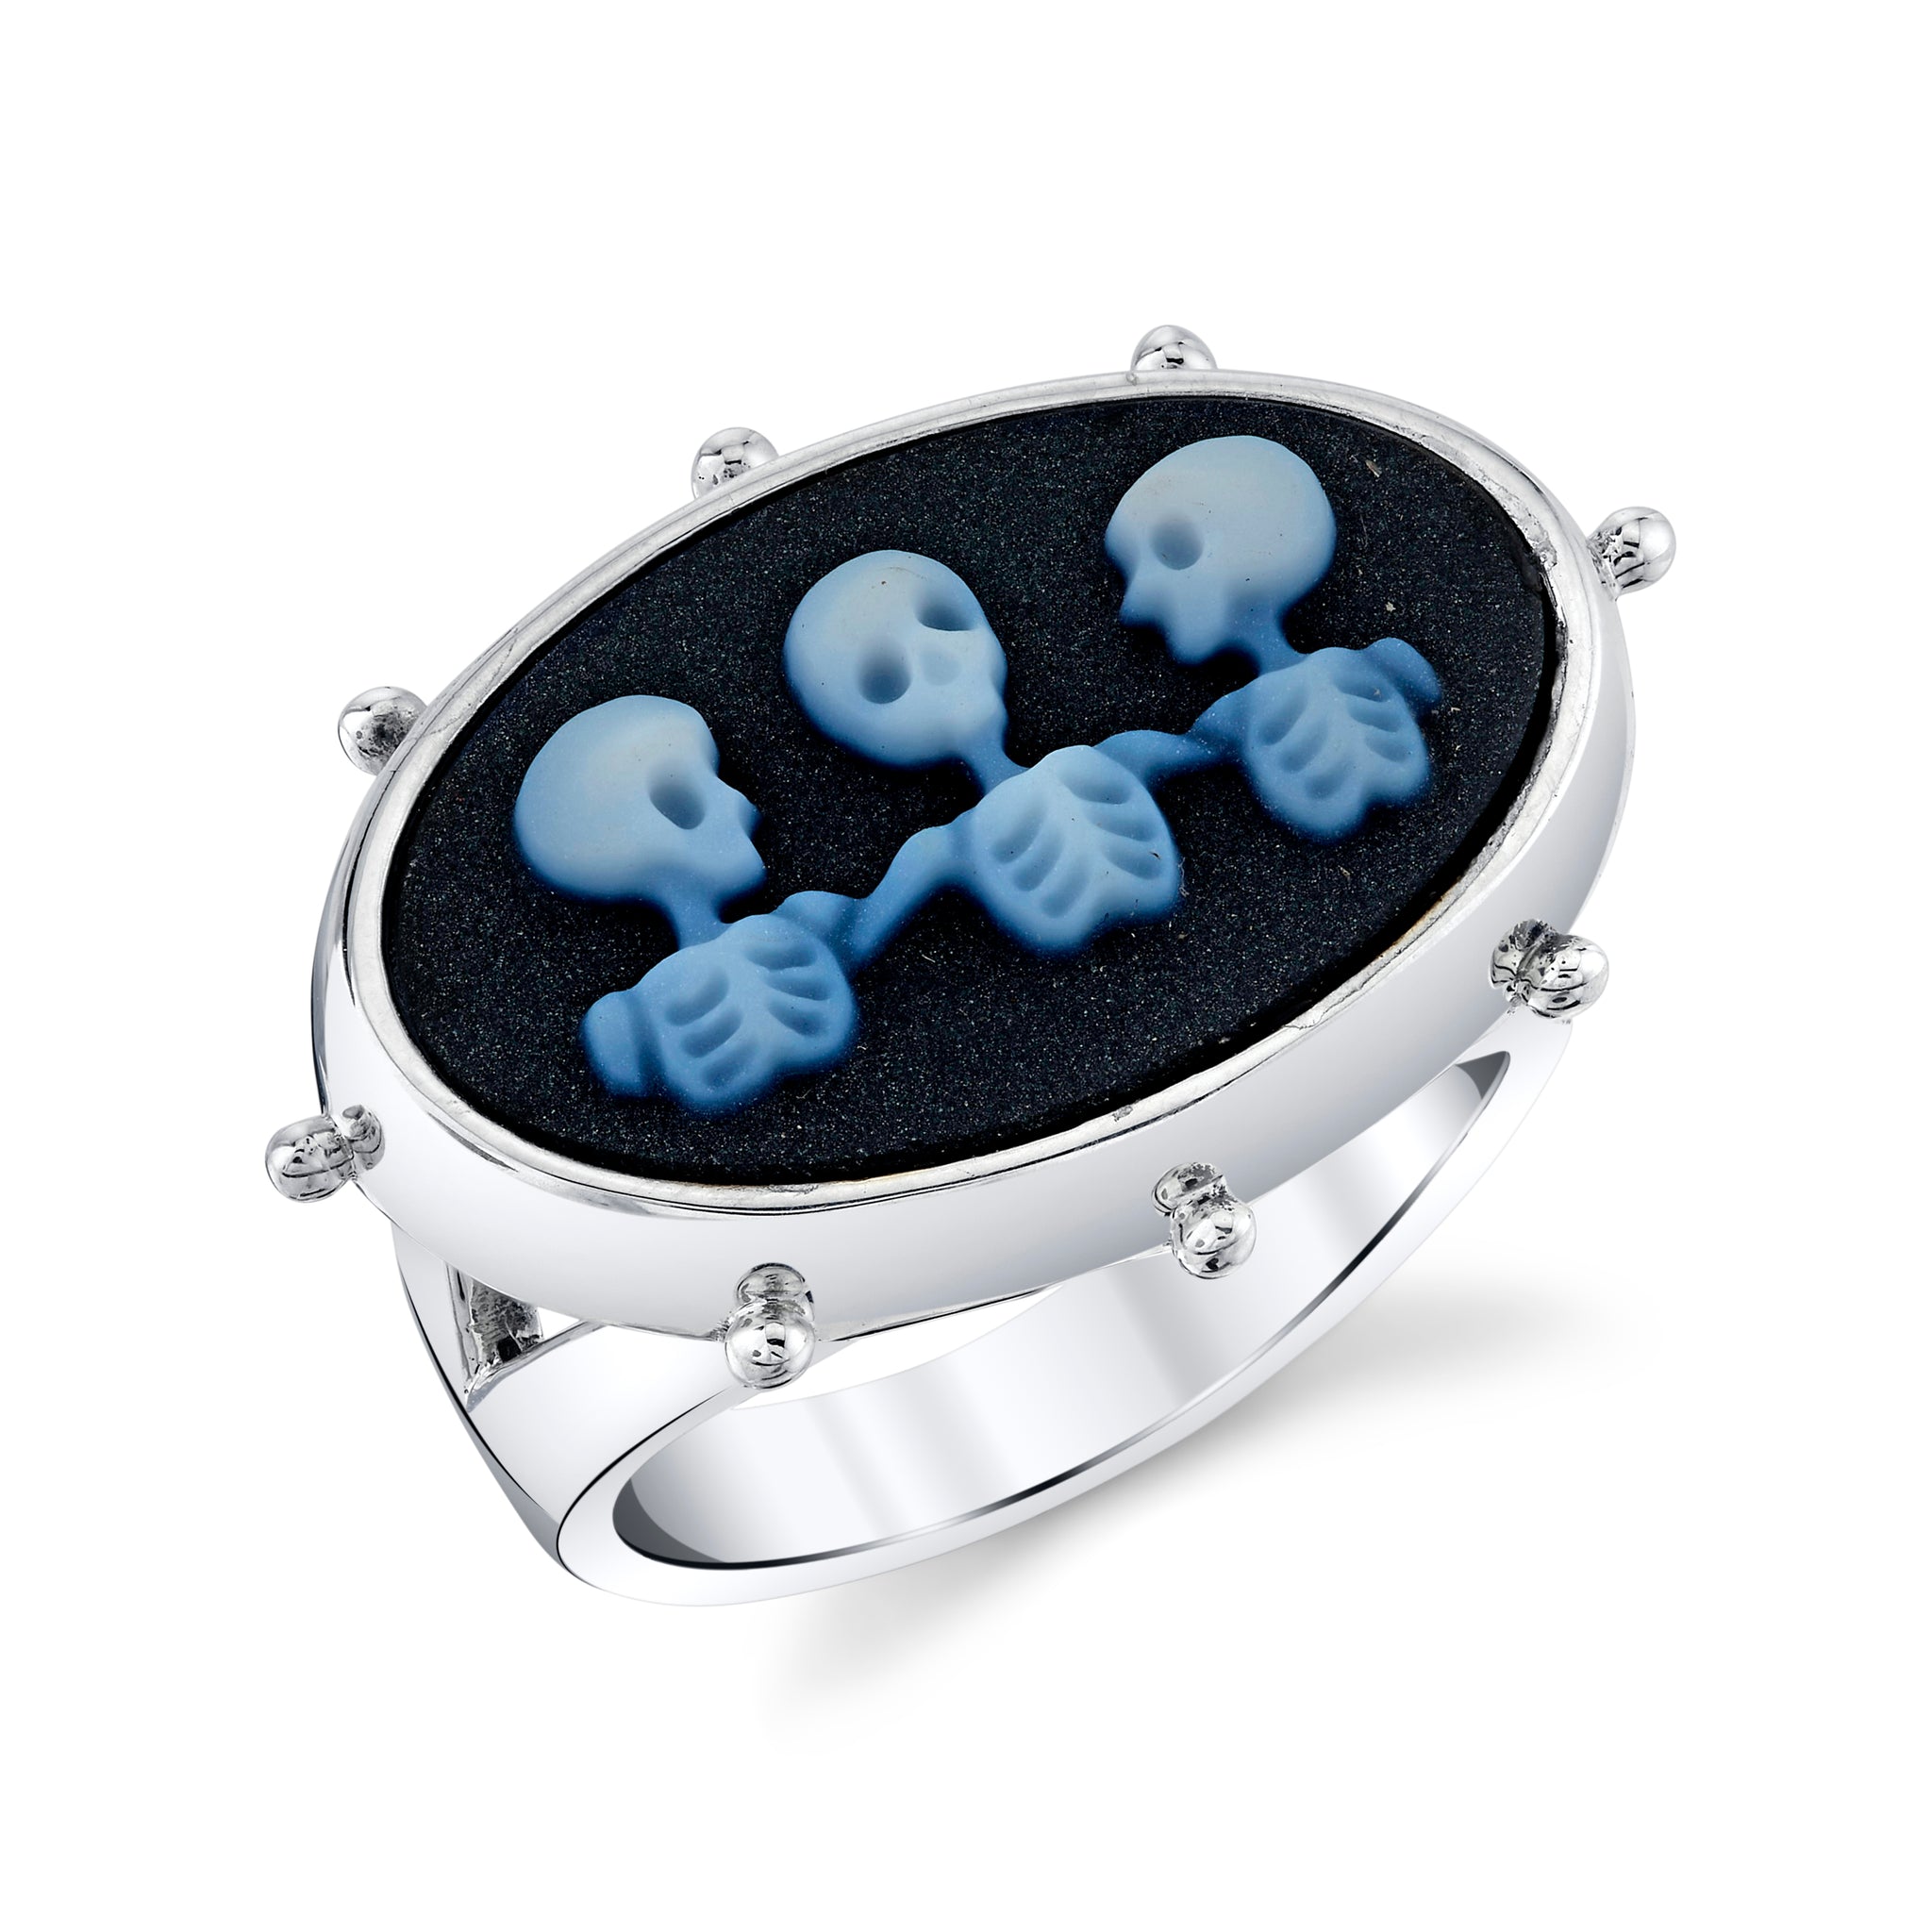 Community Cameo Skeleton Ring in Agate and Silver